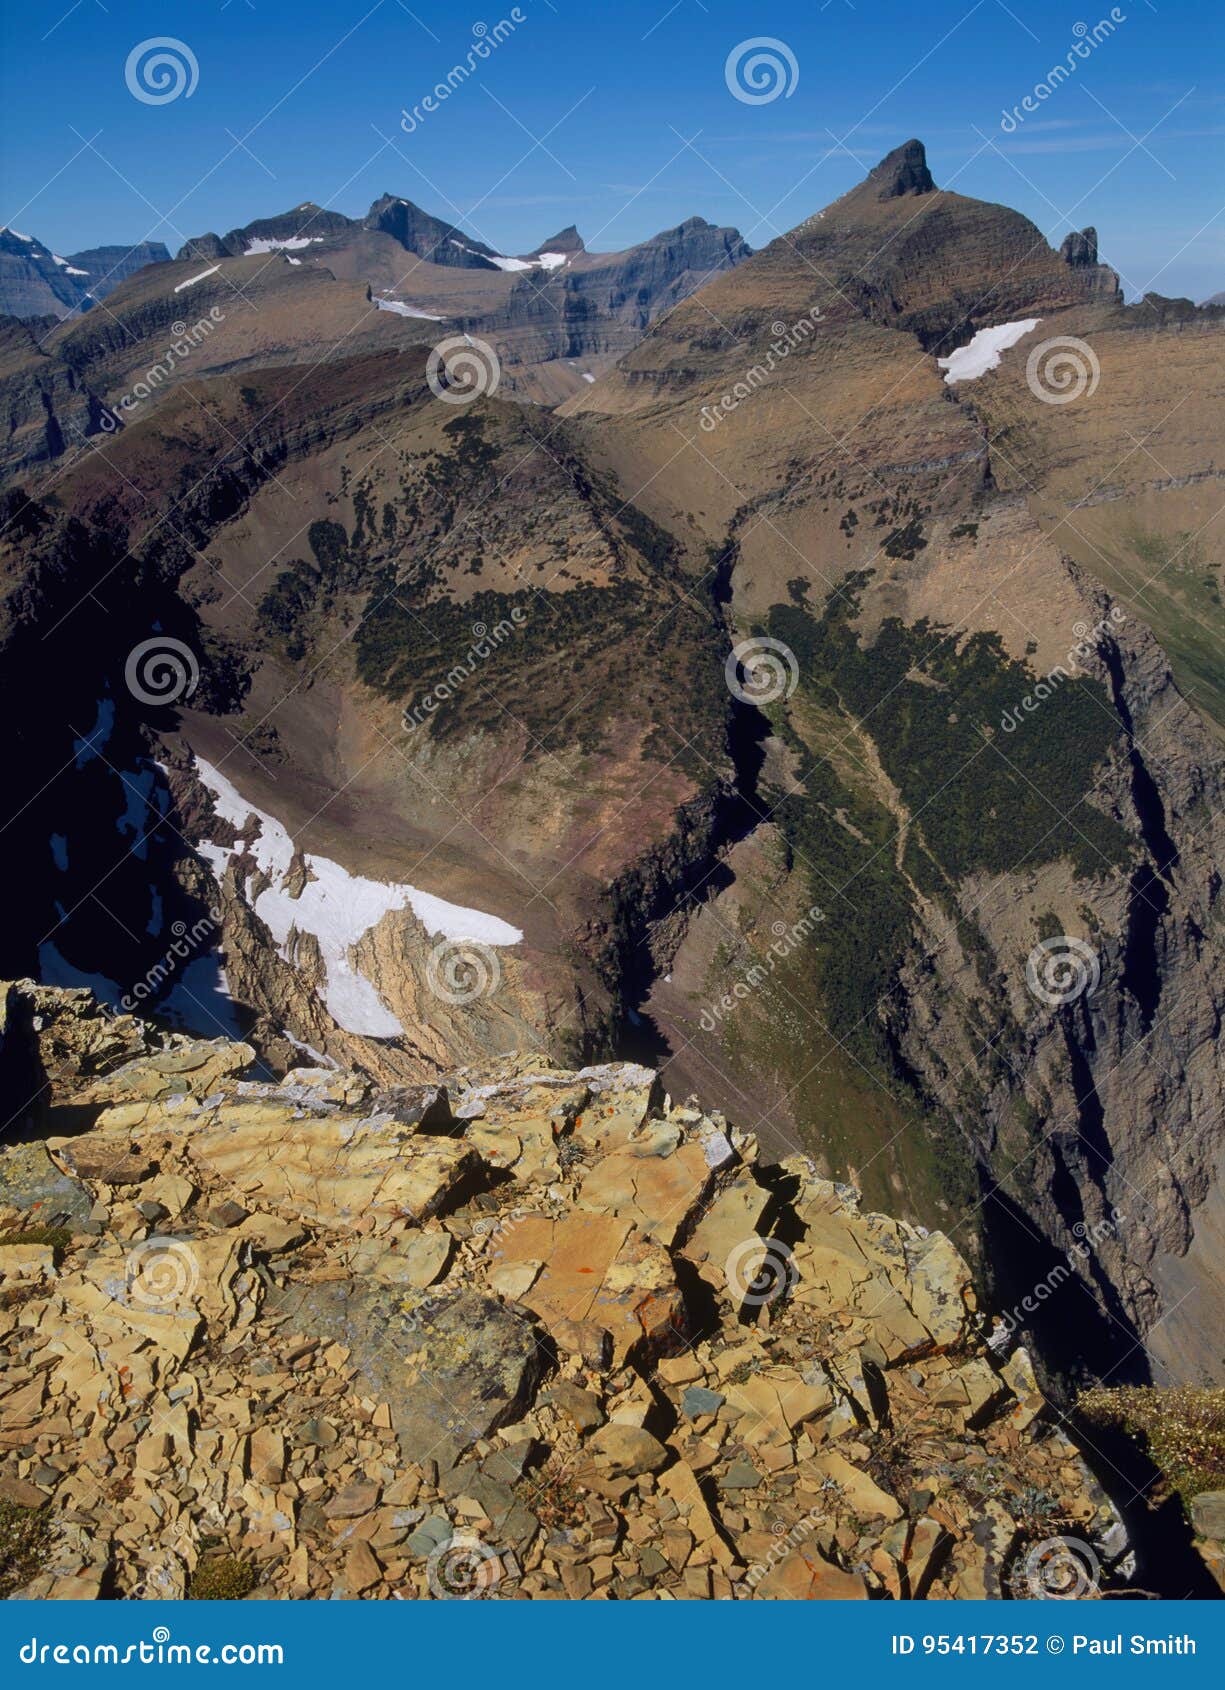 from the summit of swiftcurrent mountain, lewis range, glacier national park, montana